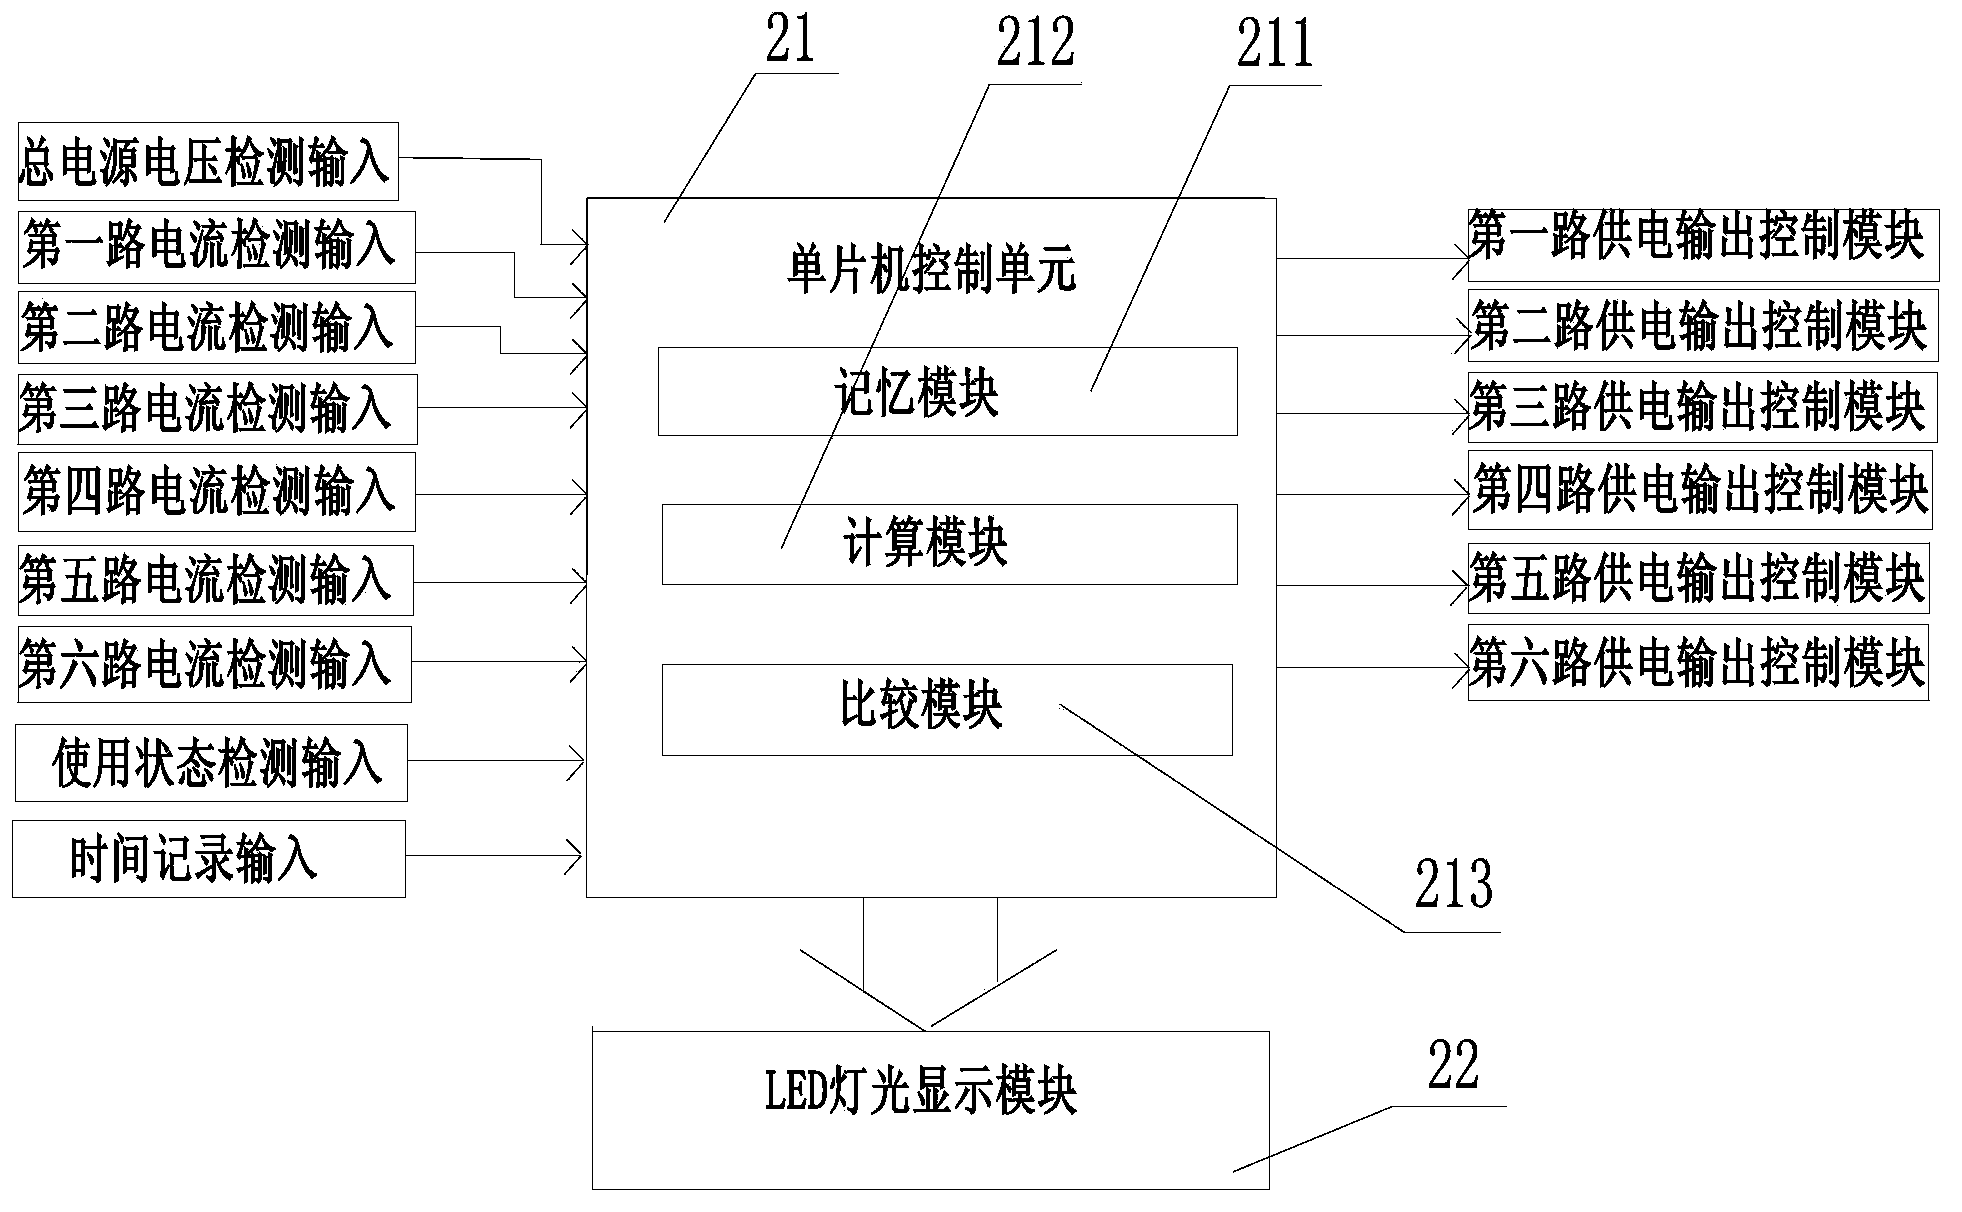 Home electricity distribution control system and method